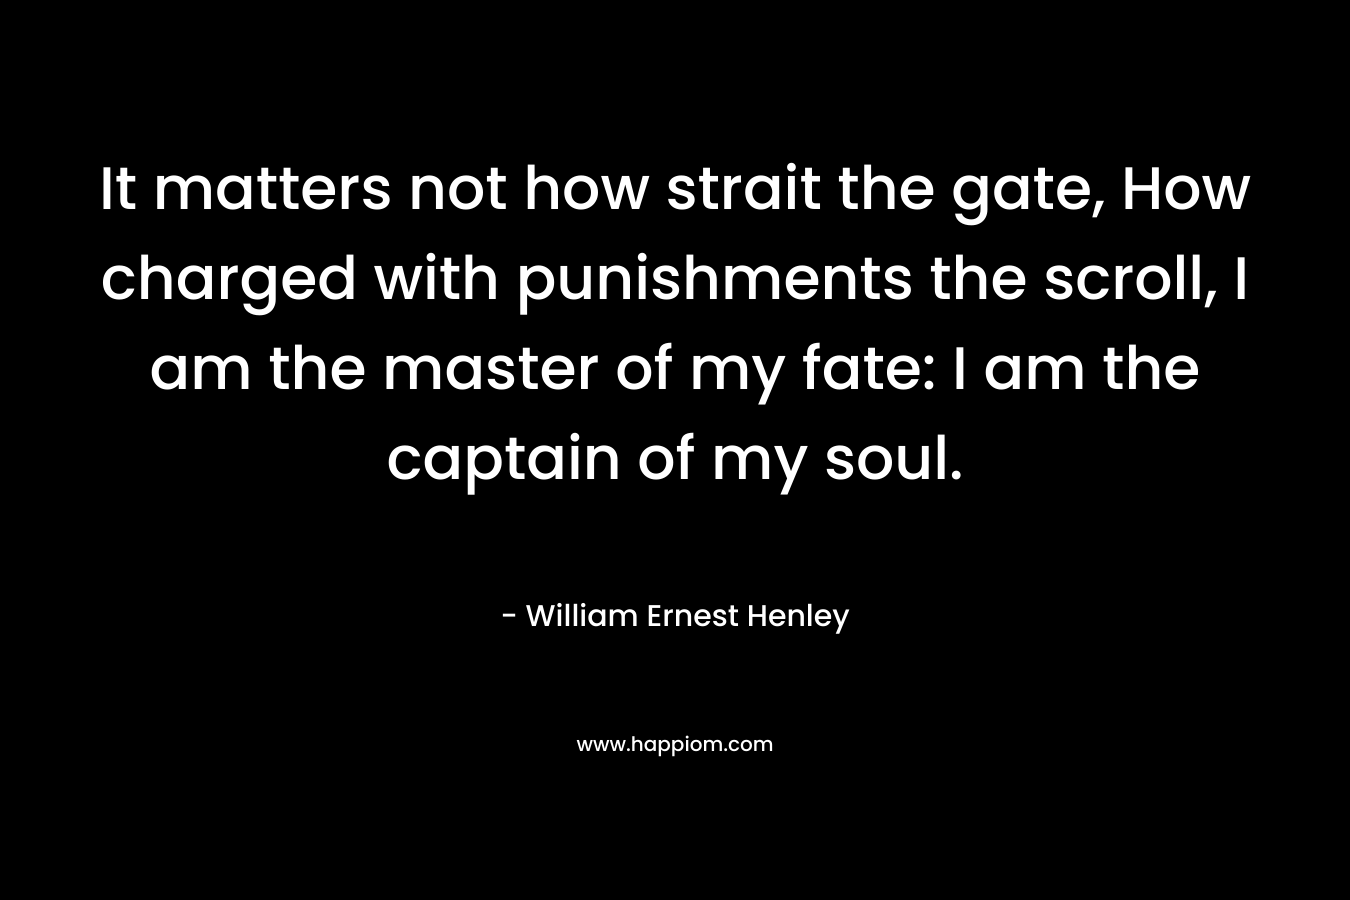 It matters not how strait the gate, How charged with punishments the scroll, I am the master of my fate: I am the captain of my soul. – William Ernest Henley